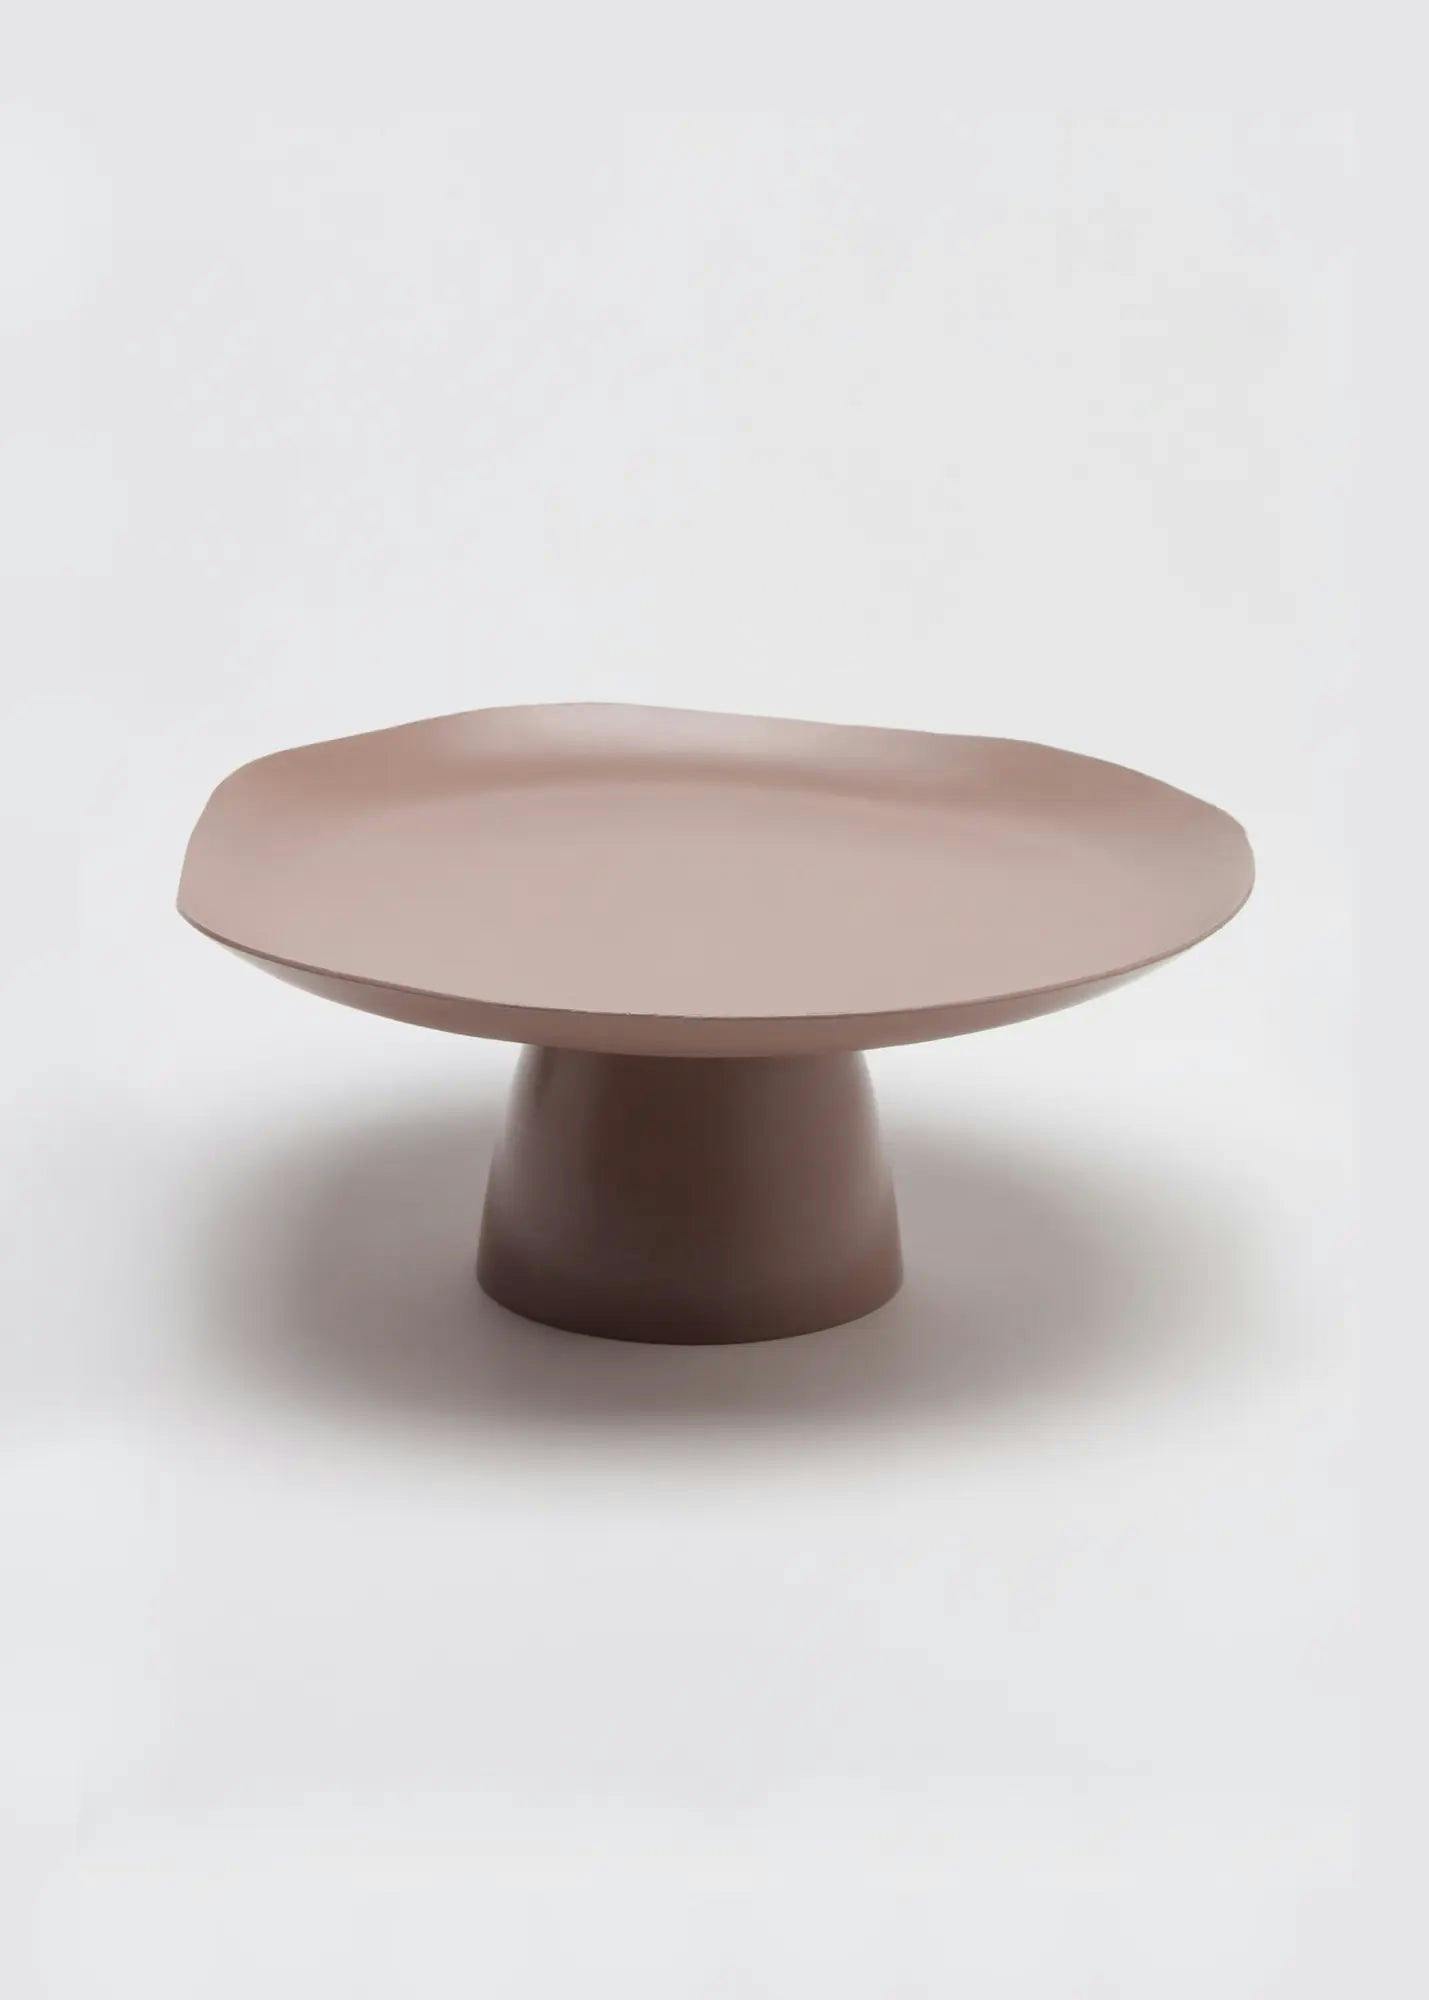 Mini Cookie Stand-Dusty Pink, a product by Gado Living